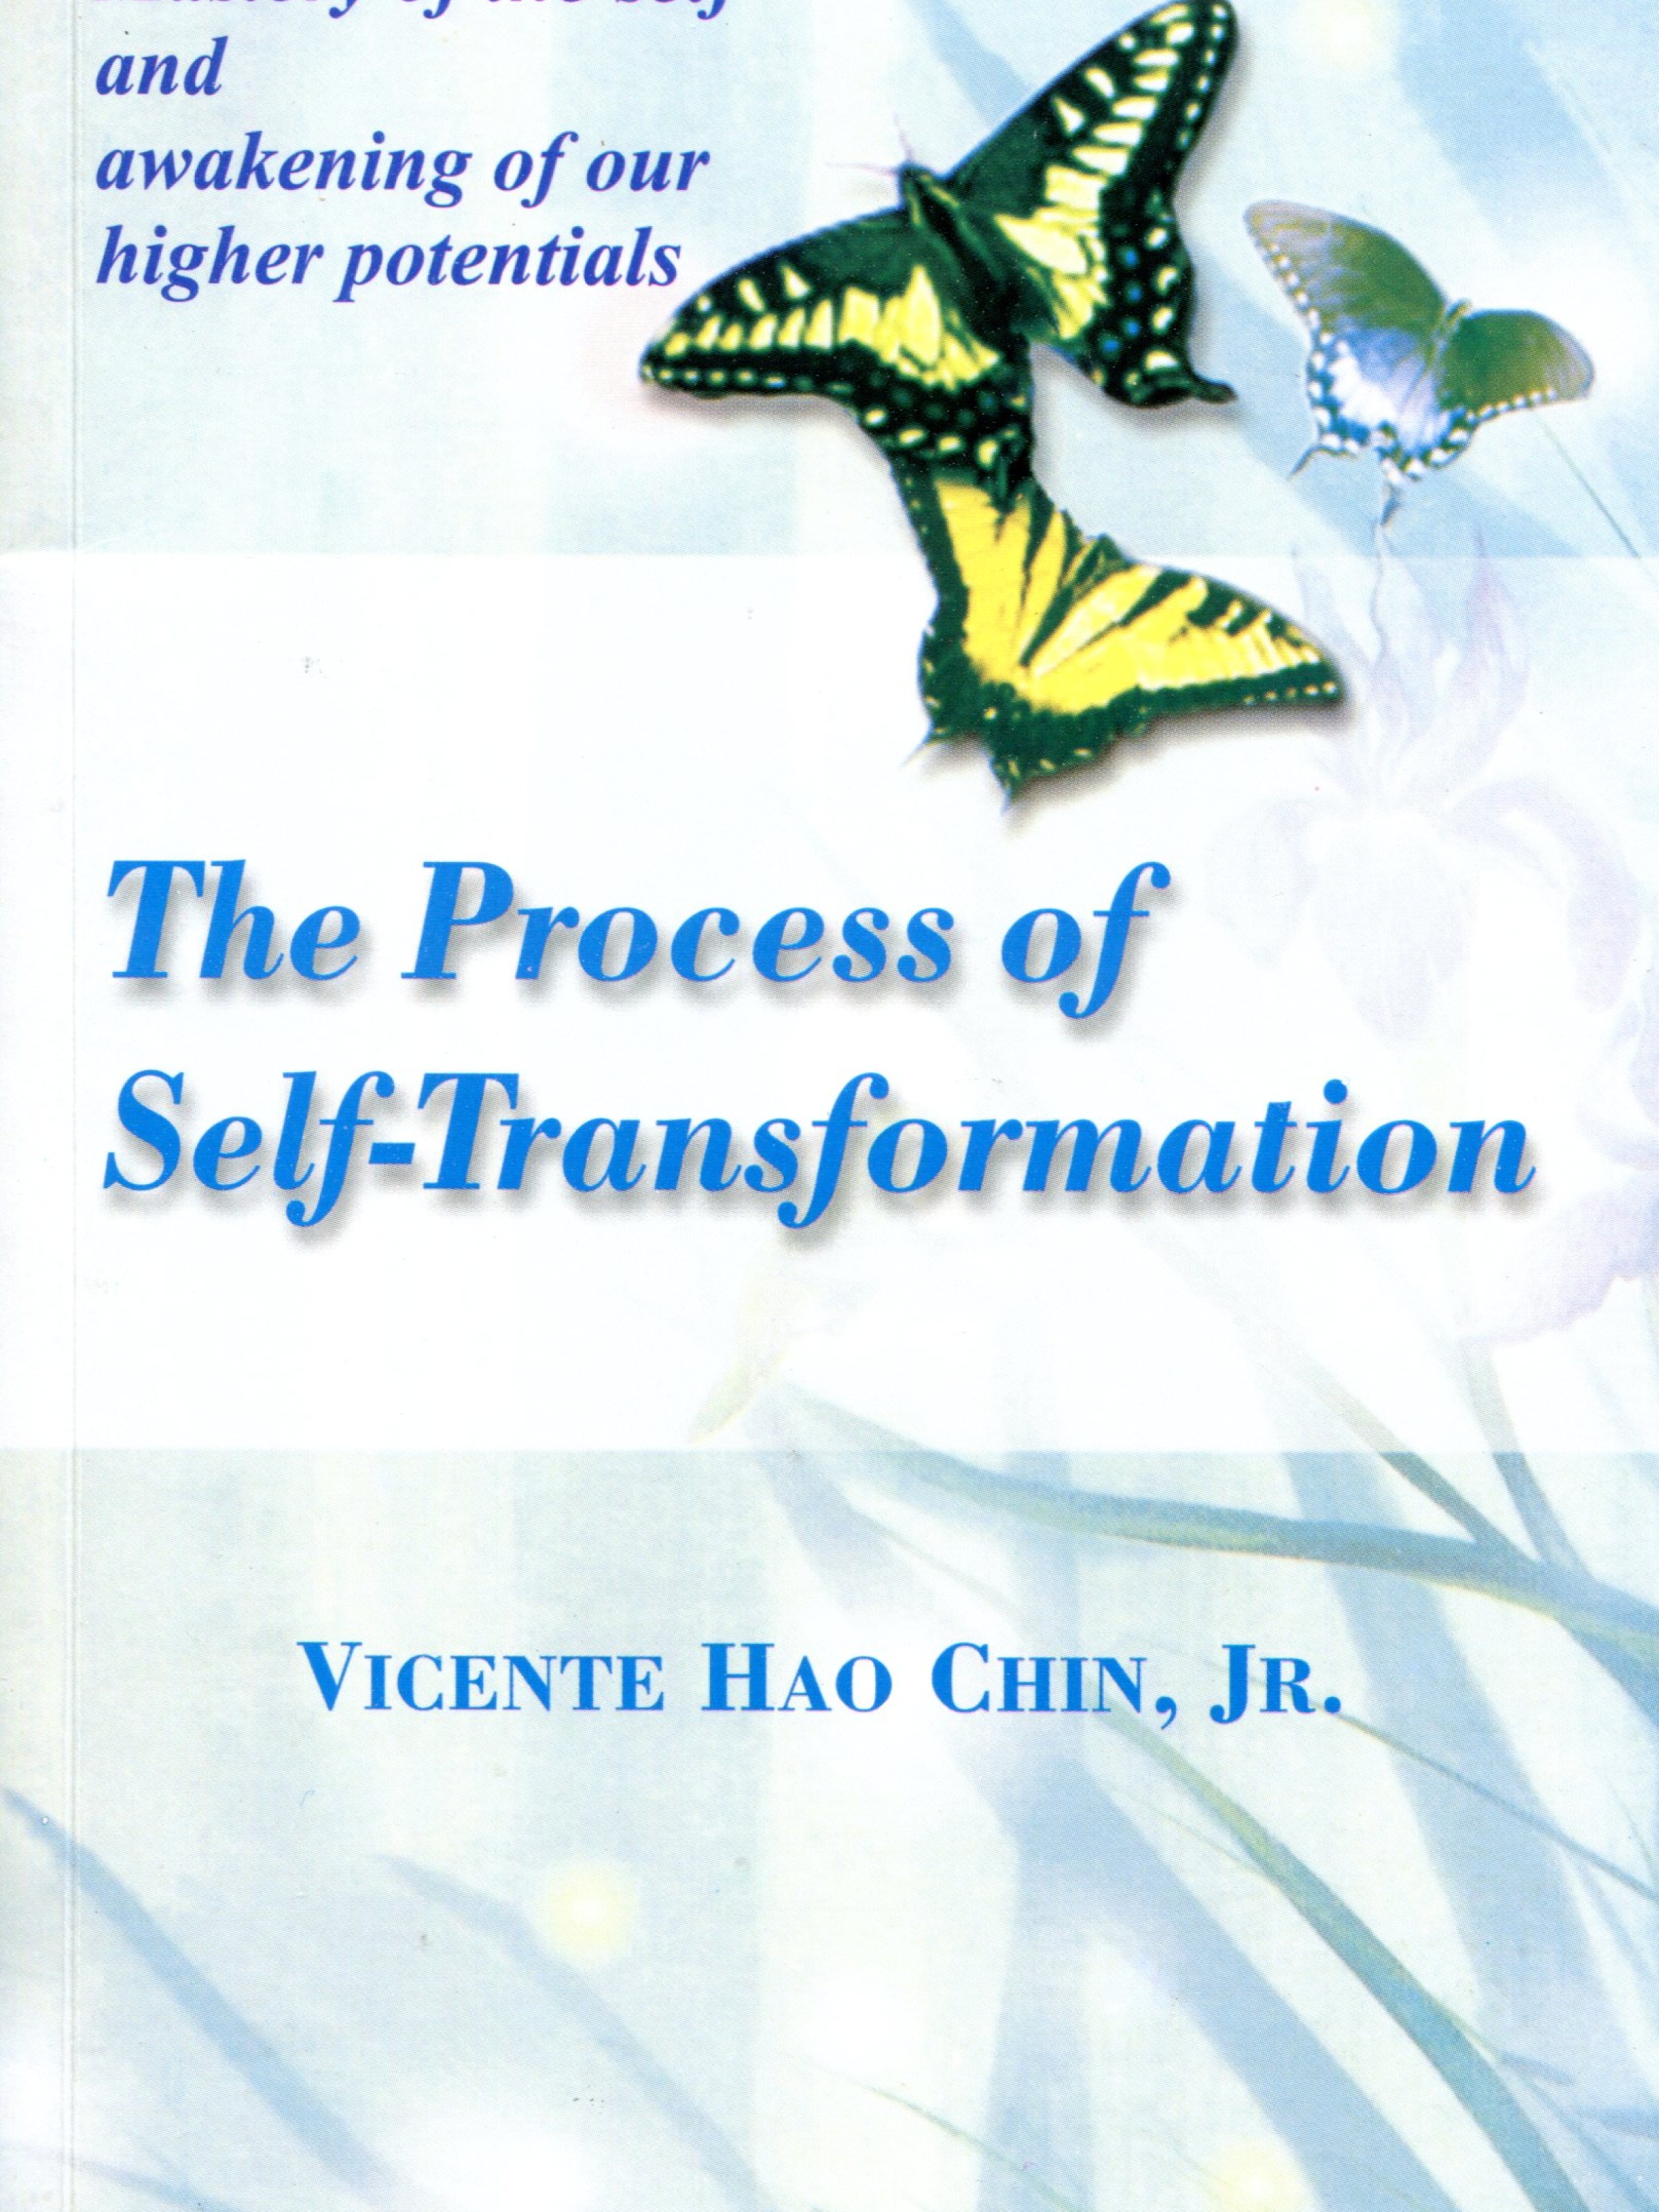 The Process of Self-Transformation